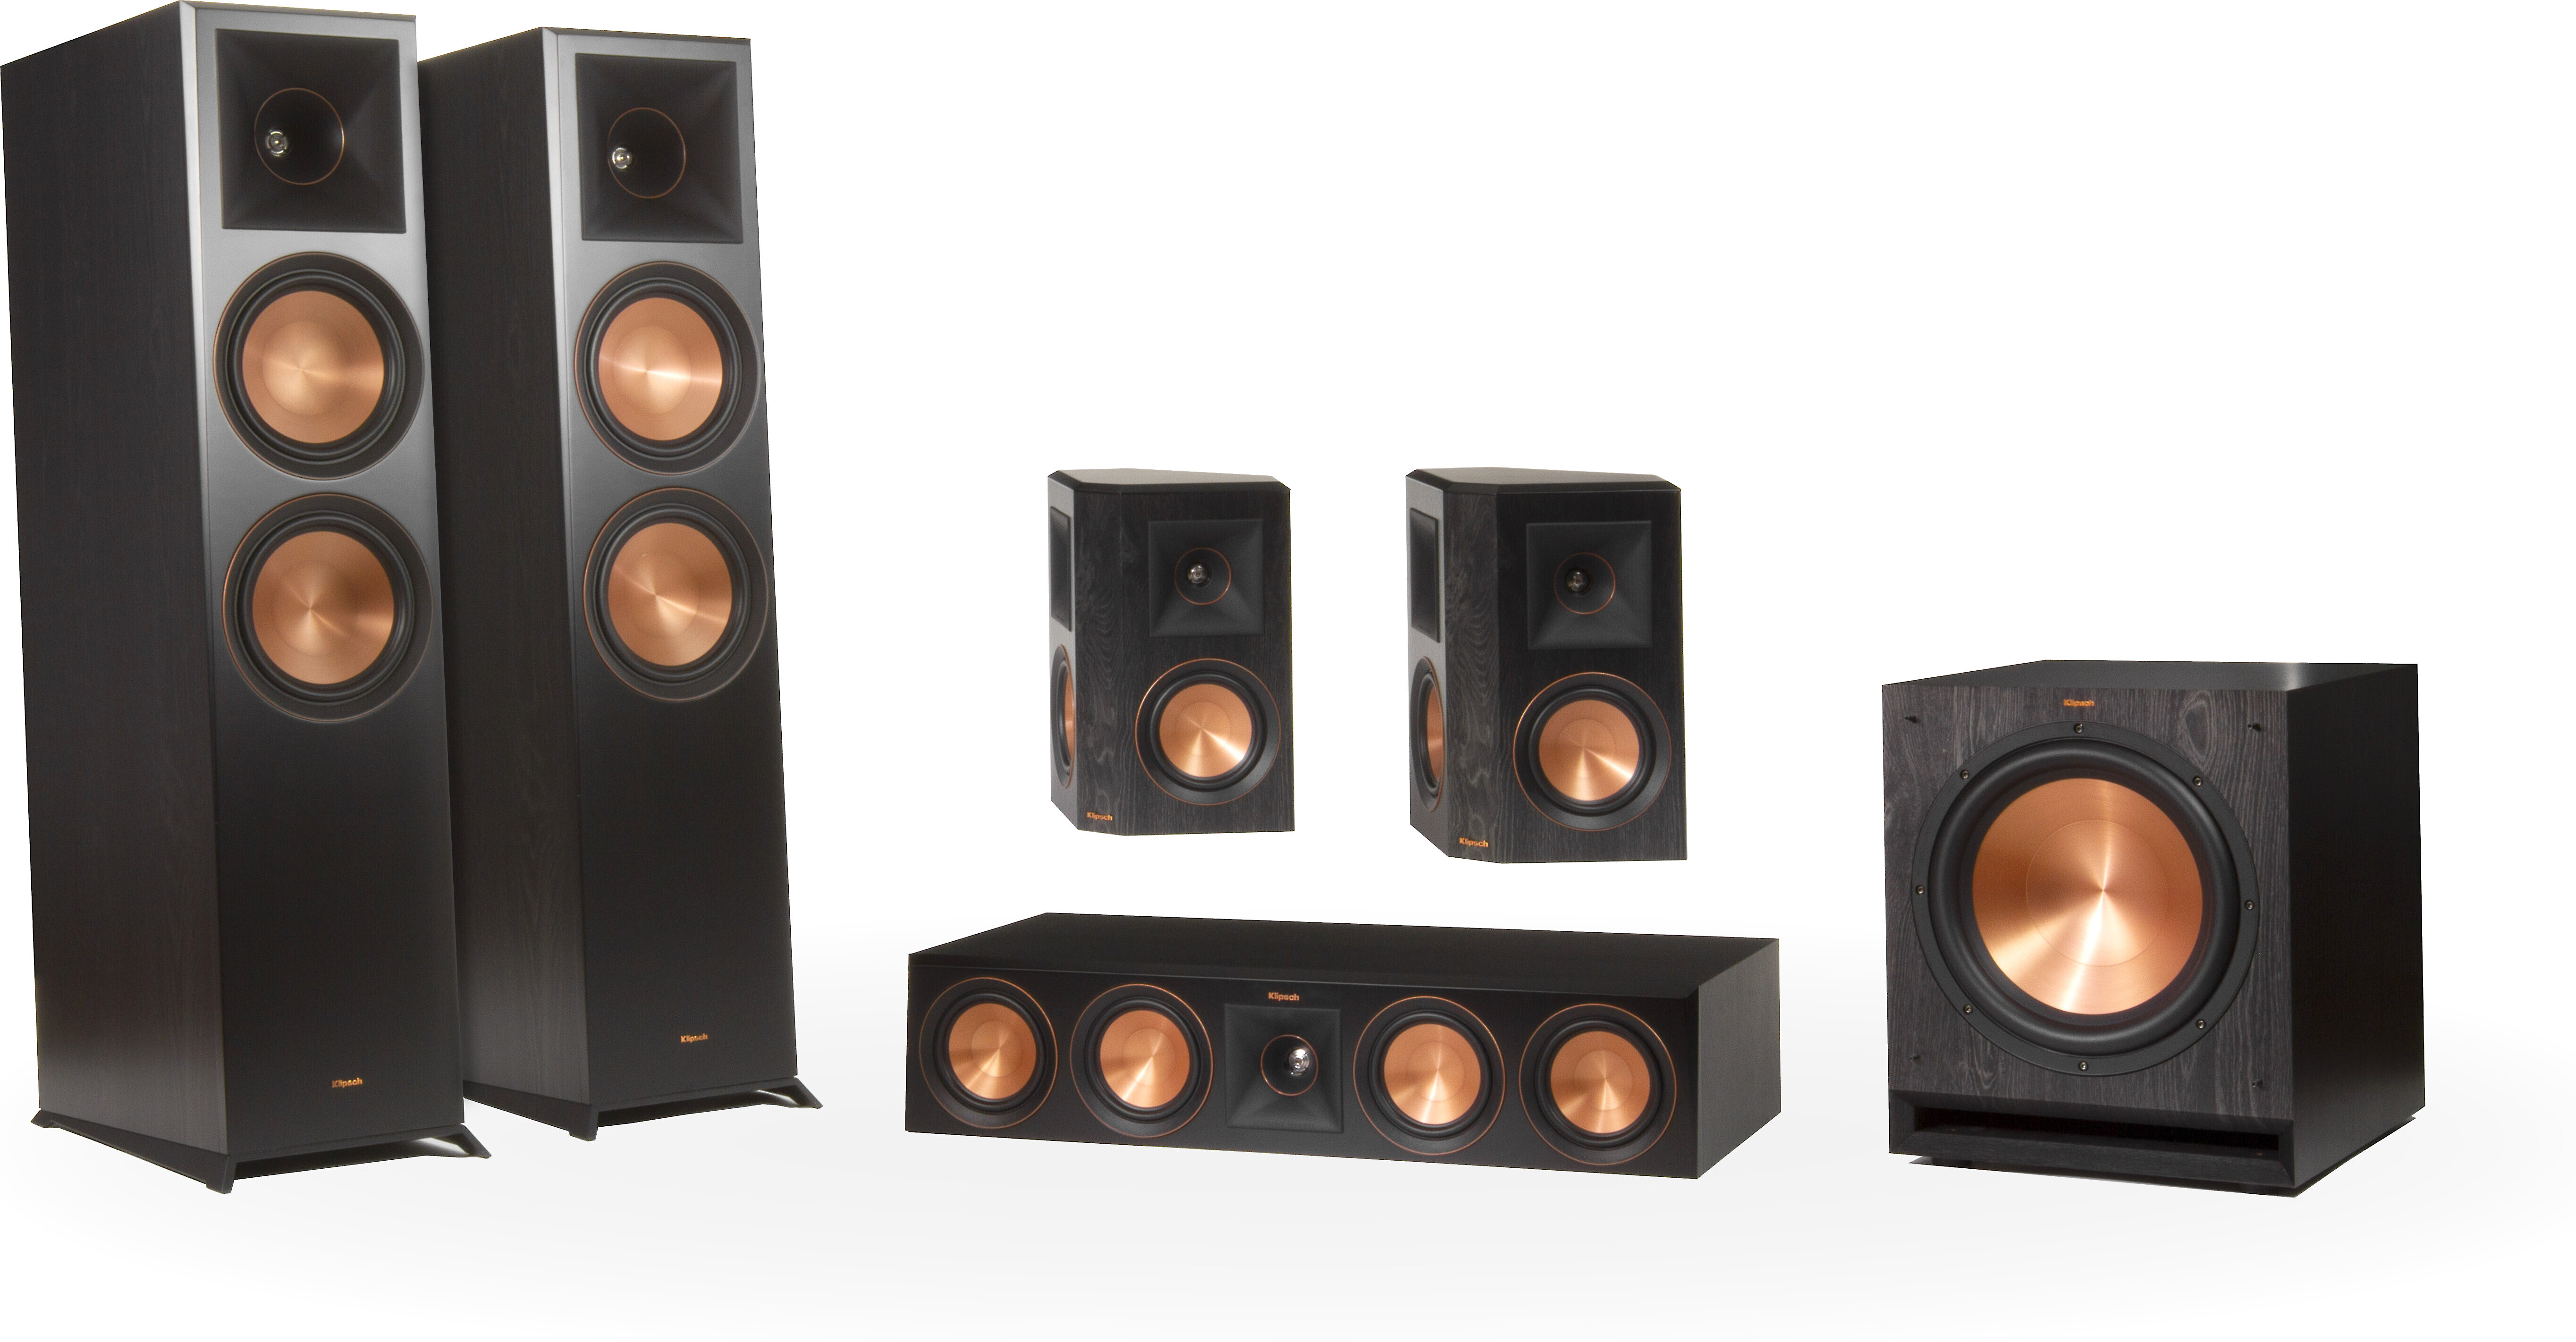 Klipsch Rp-500sa Walnut. Klipsch r-41sa. 360 Spatial Sound Mapping Dolby Atmos® / DTS:X® Home Theater System | HT-a9. Top Speakers in Theatre.